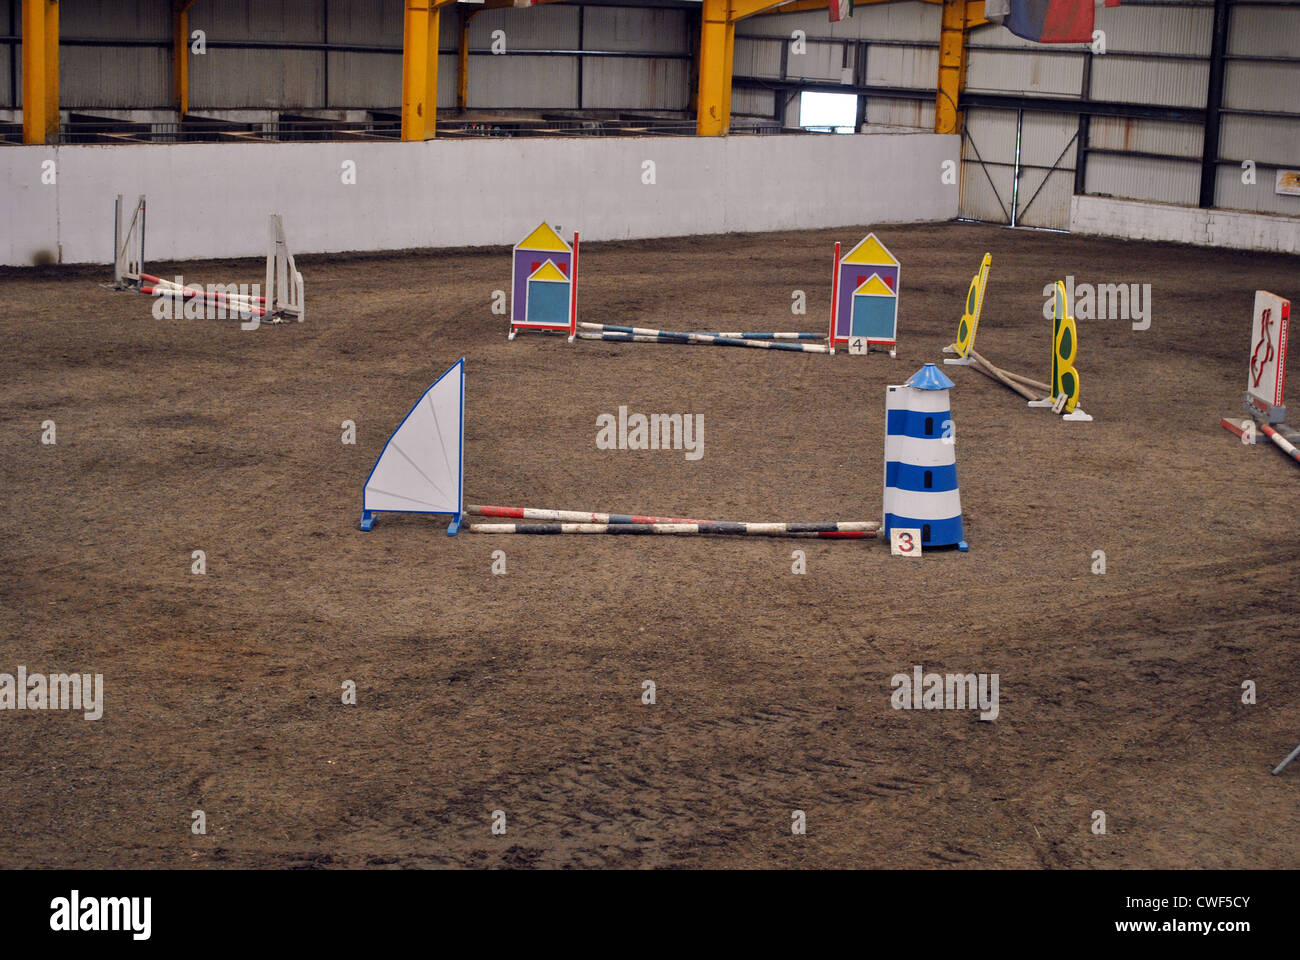 indoor show jumping arena Stock Photo